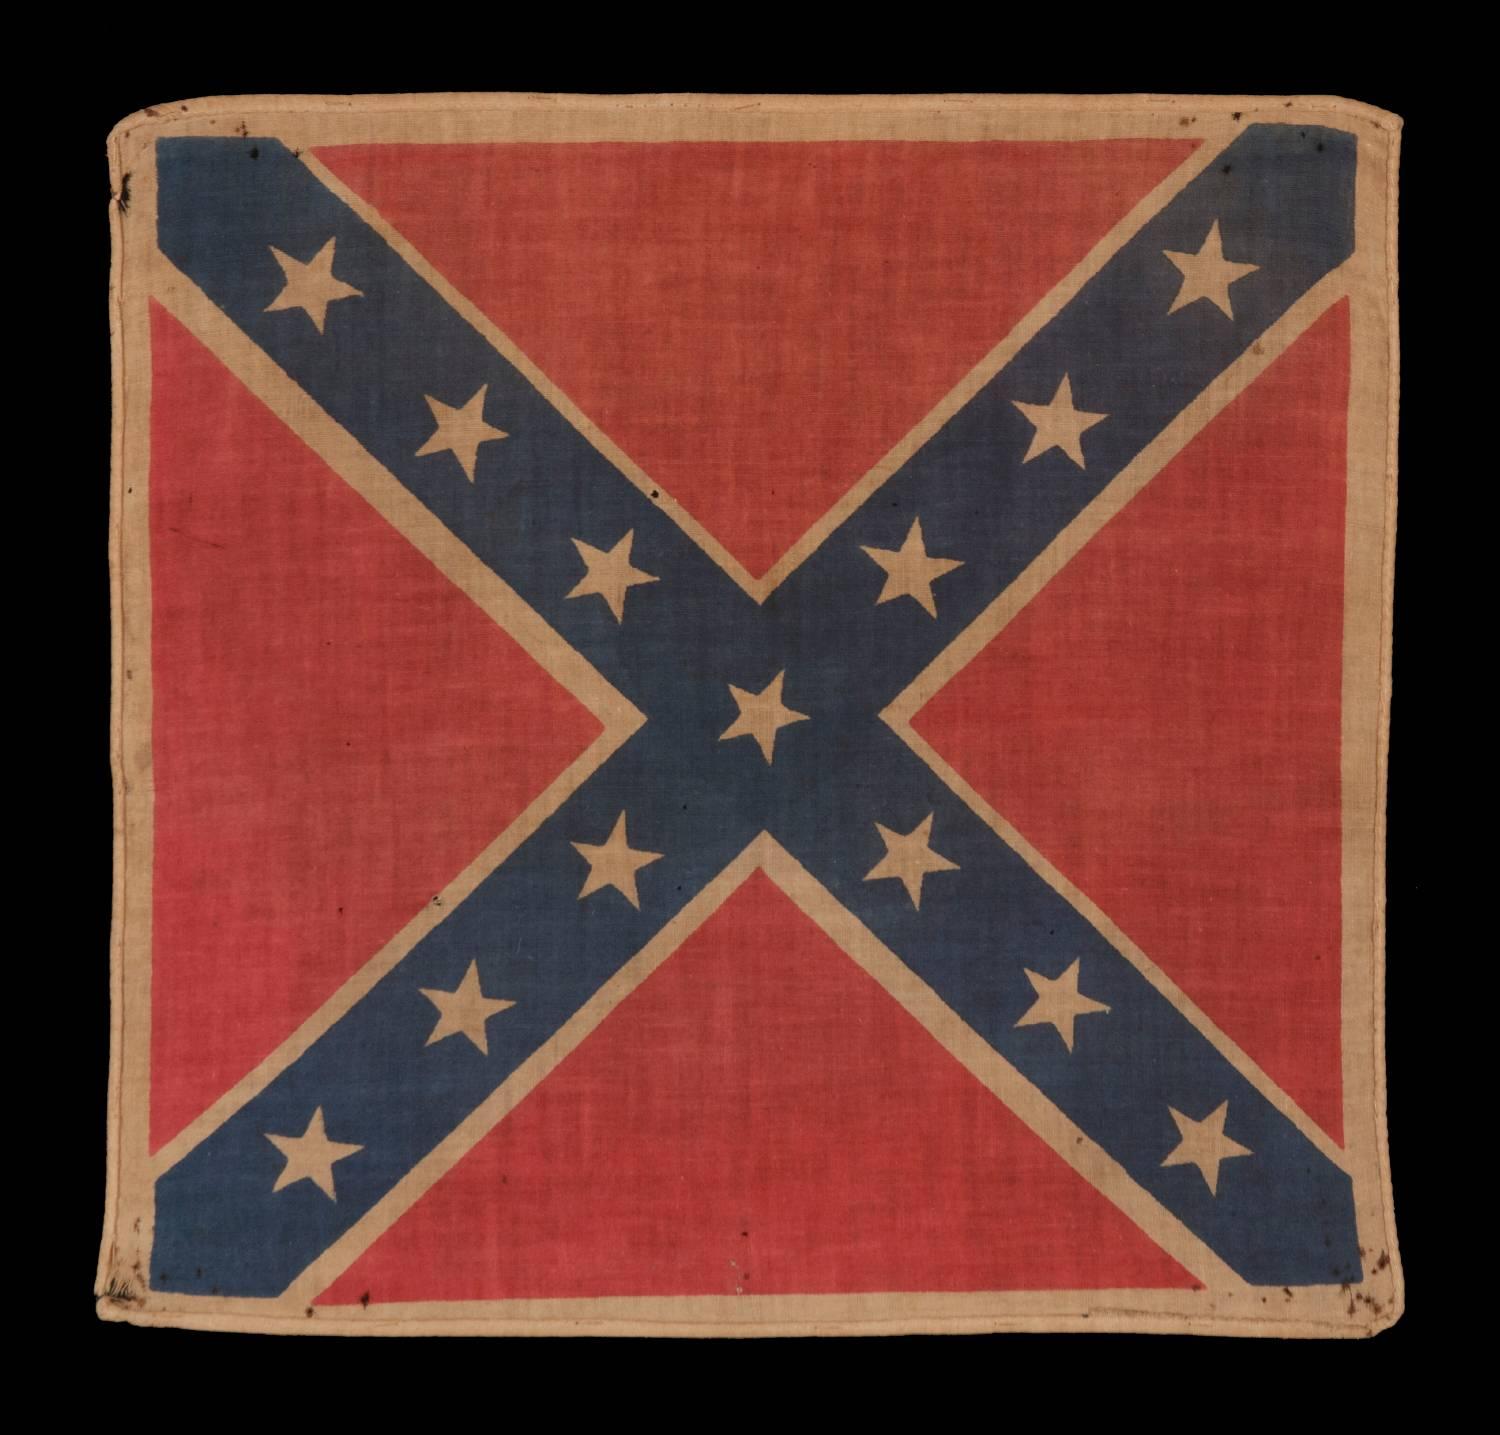 Confederate parade flag in the southern cross battle flag format, reunion period, 1910s-1920s:

 Confederate parade flag in the Southern cross “battle flag” style, printed on cotton, made sometime during the 1900-1940 era. Many people are